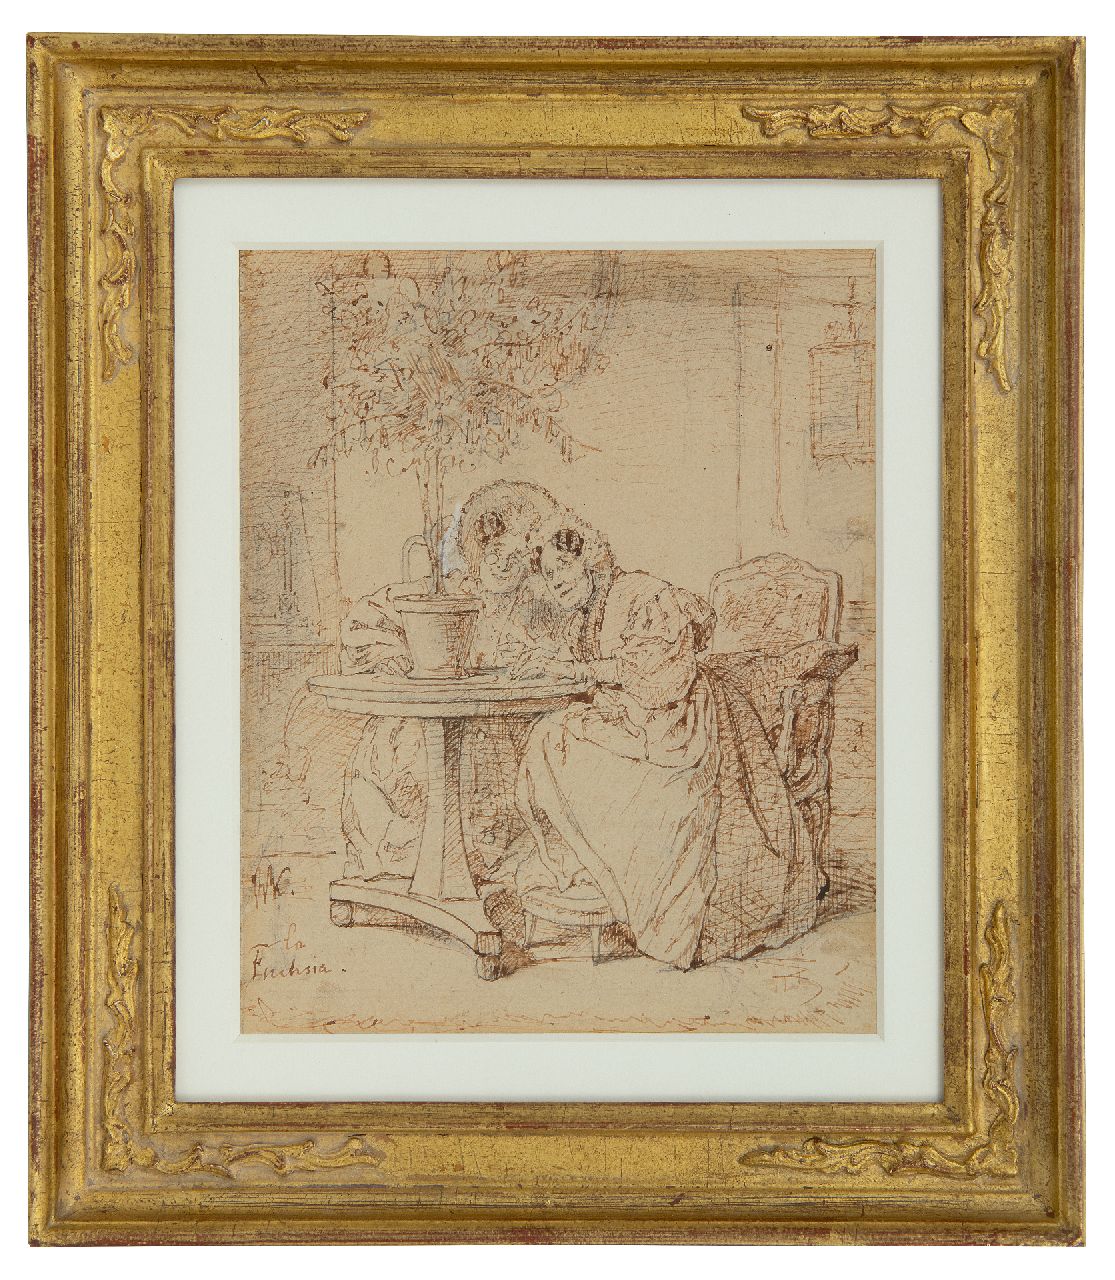 Bakker Korff A.H.  | Alexander Hugo Bakker Korff | Watercolours and drawings offered for sale | The Fuchsia, pencil, pen and ink on paper 18.0 x 14.5 cm, signed l.l. with monogram